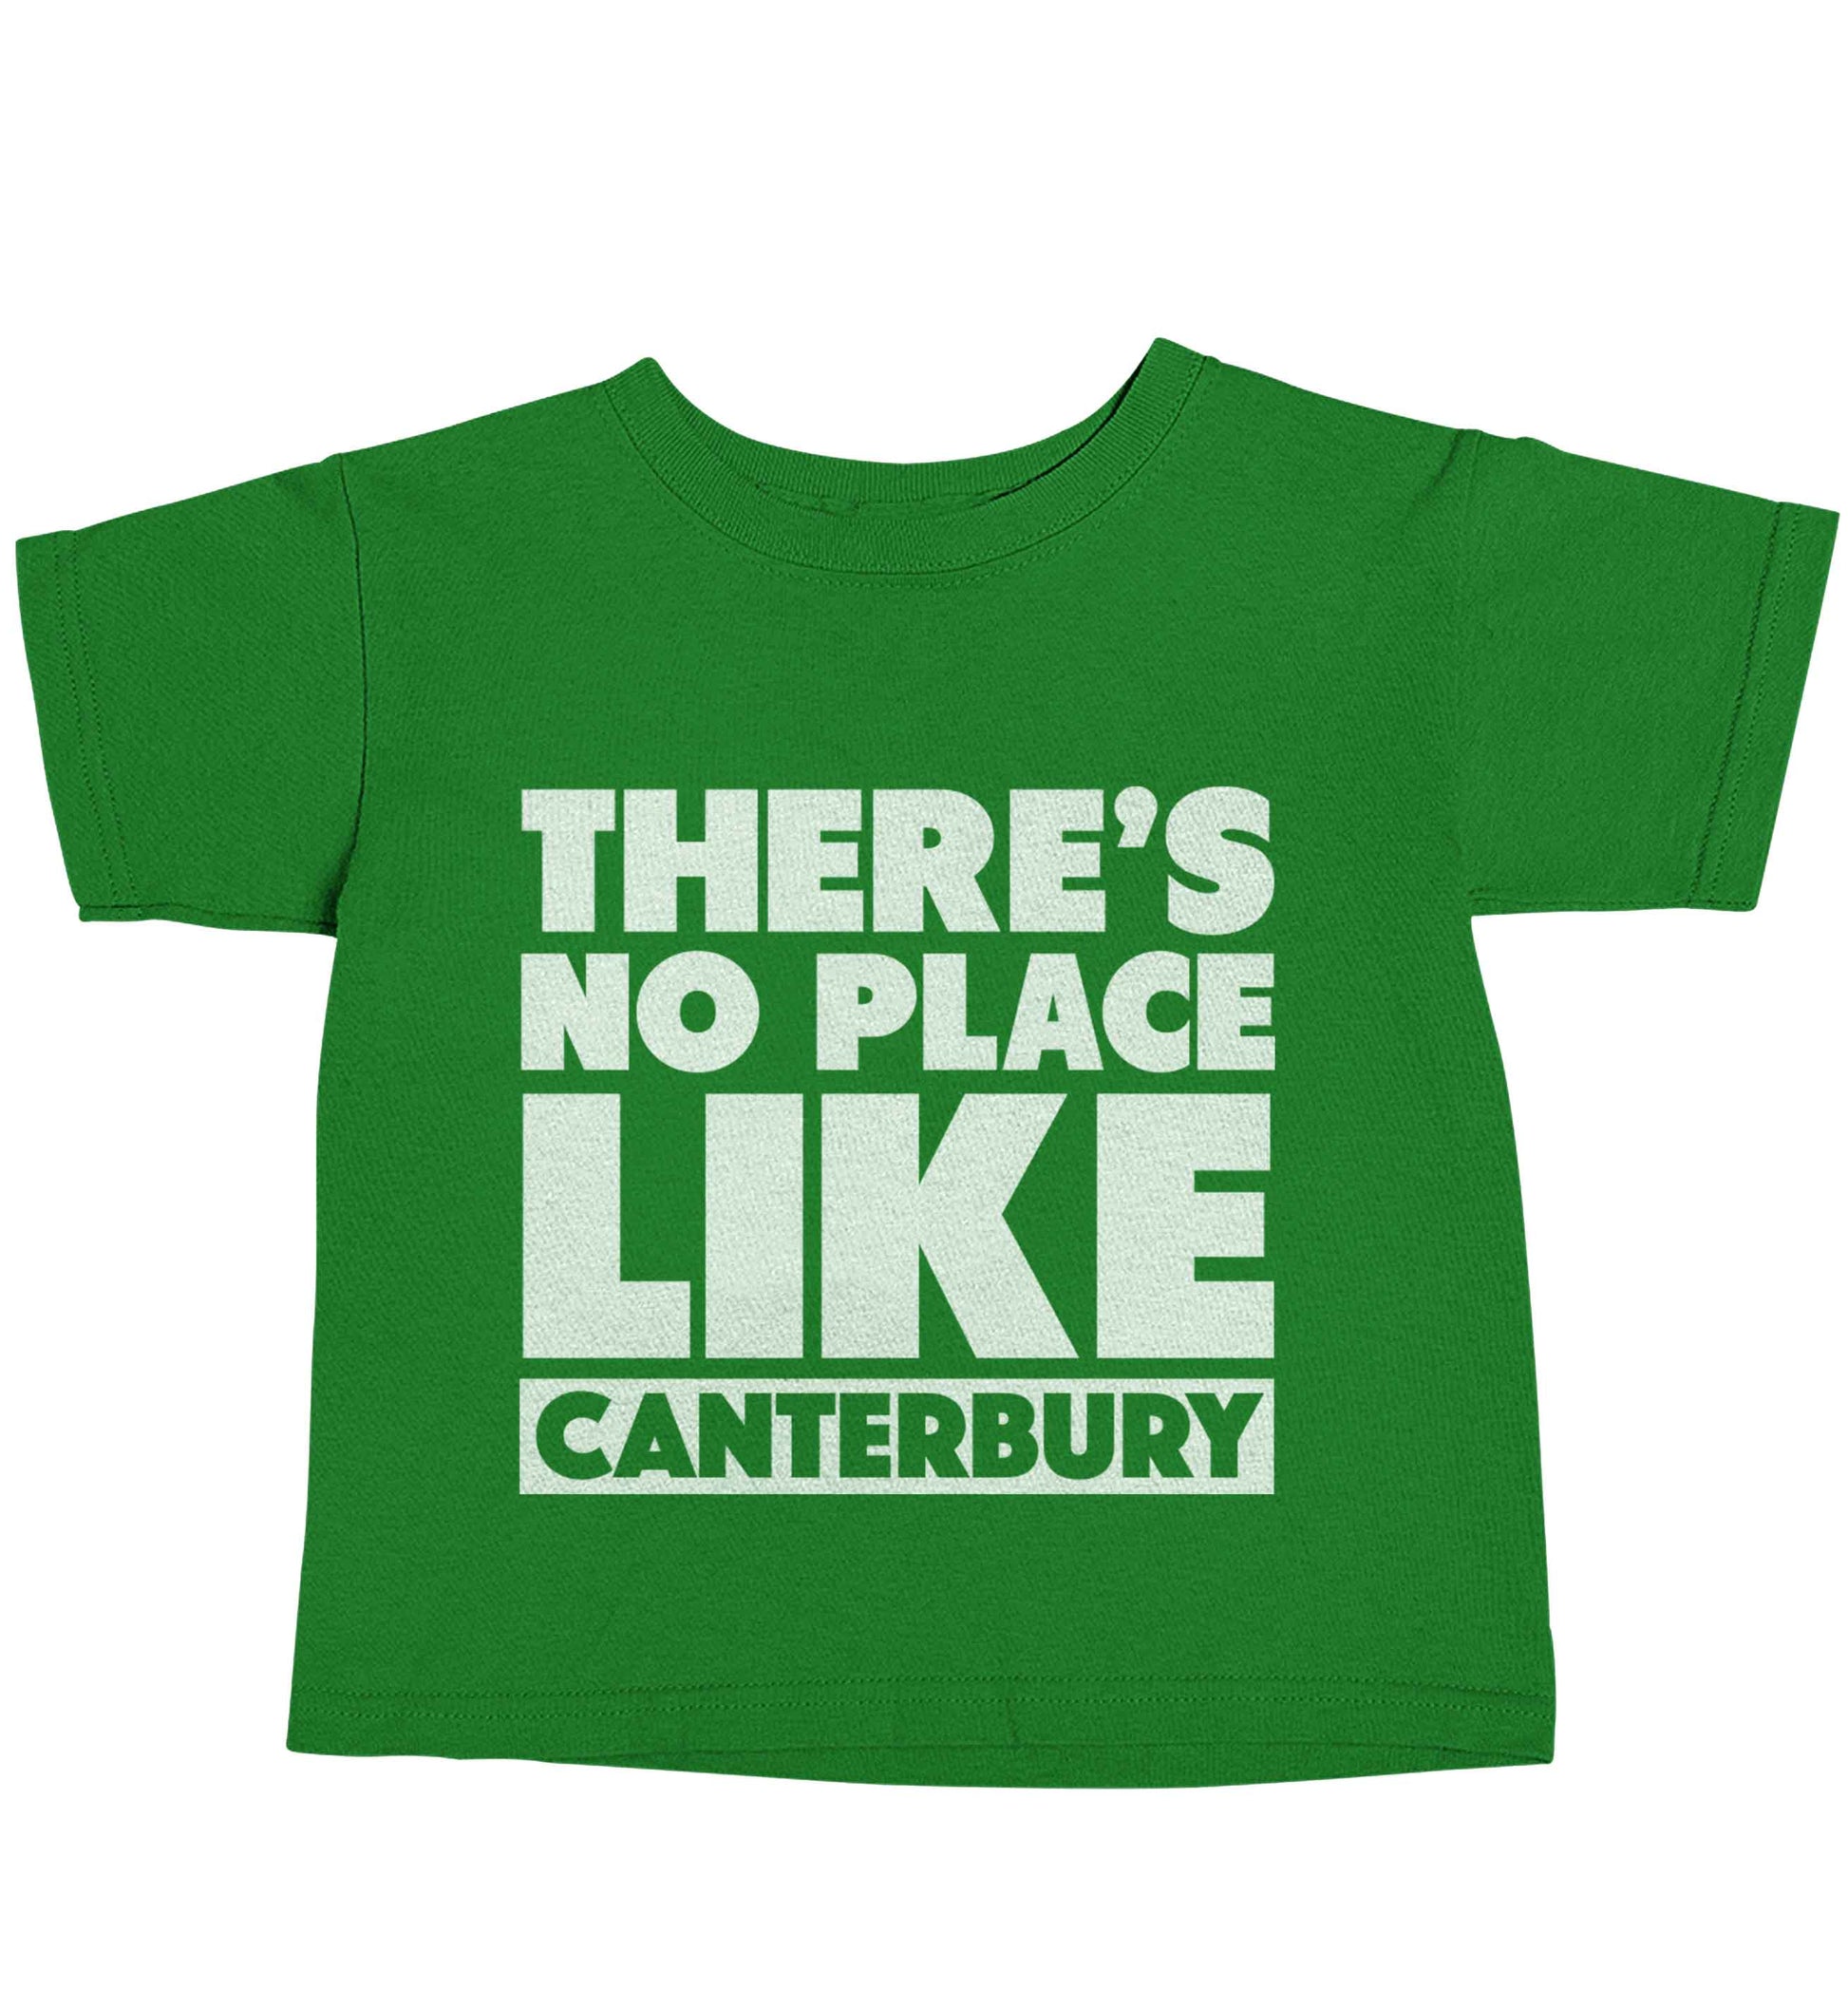 There's no place like Canterbury green baby toddler Tshirt 2 Years